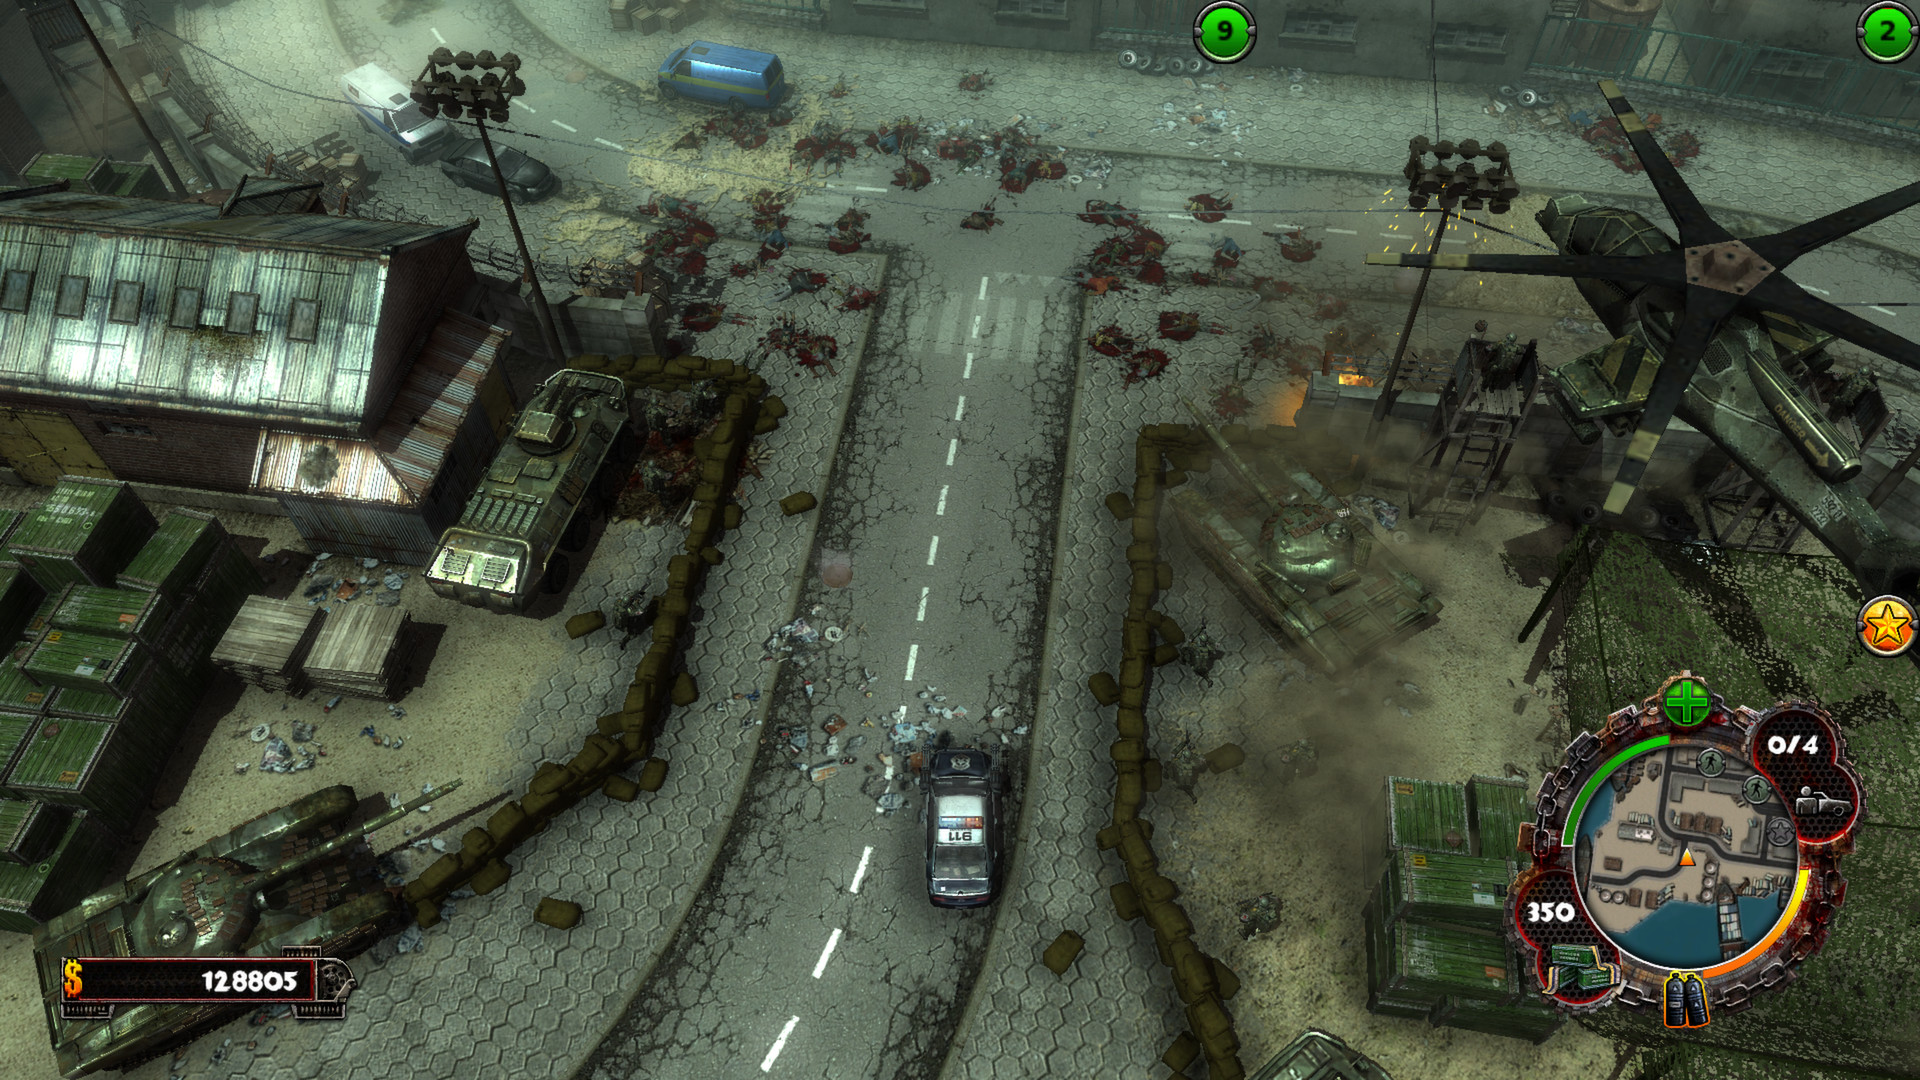 zombie driver free download